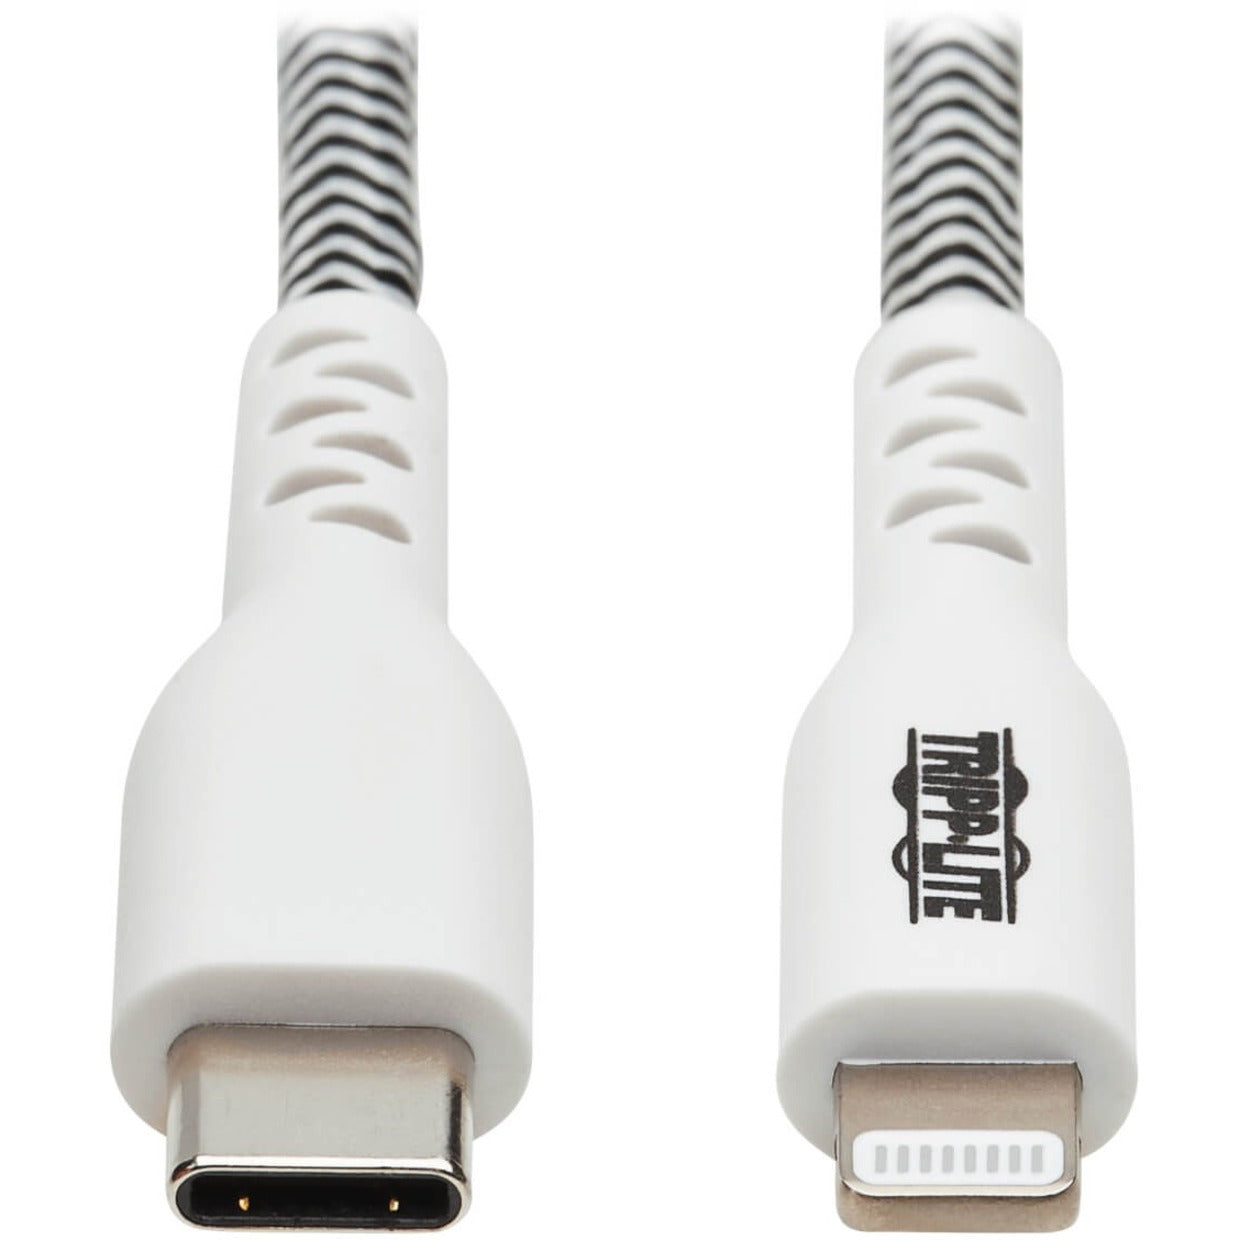 Tripp Lite M102-010-HD Heavy-Duty USB-C to C94 Lightning Cable, 10 ft, Fast Charging and Data Transfer